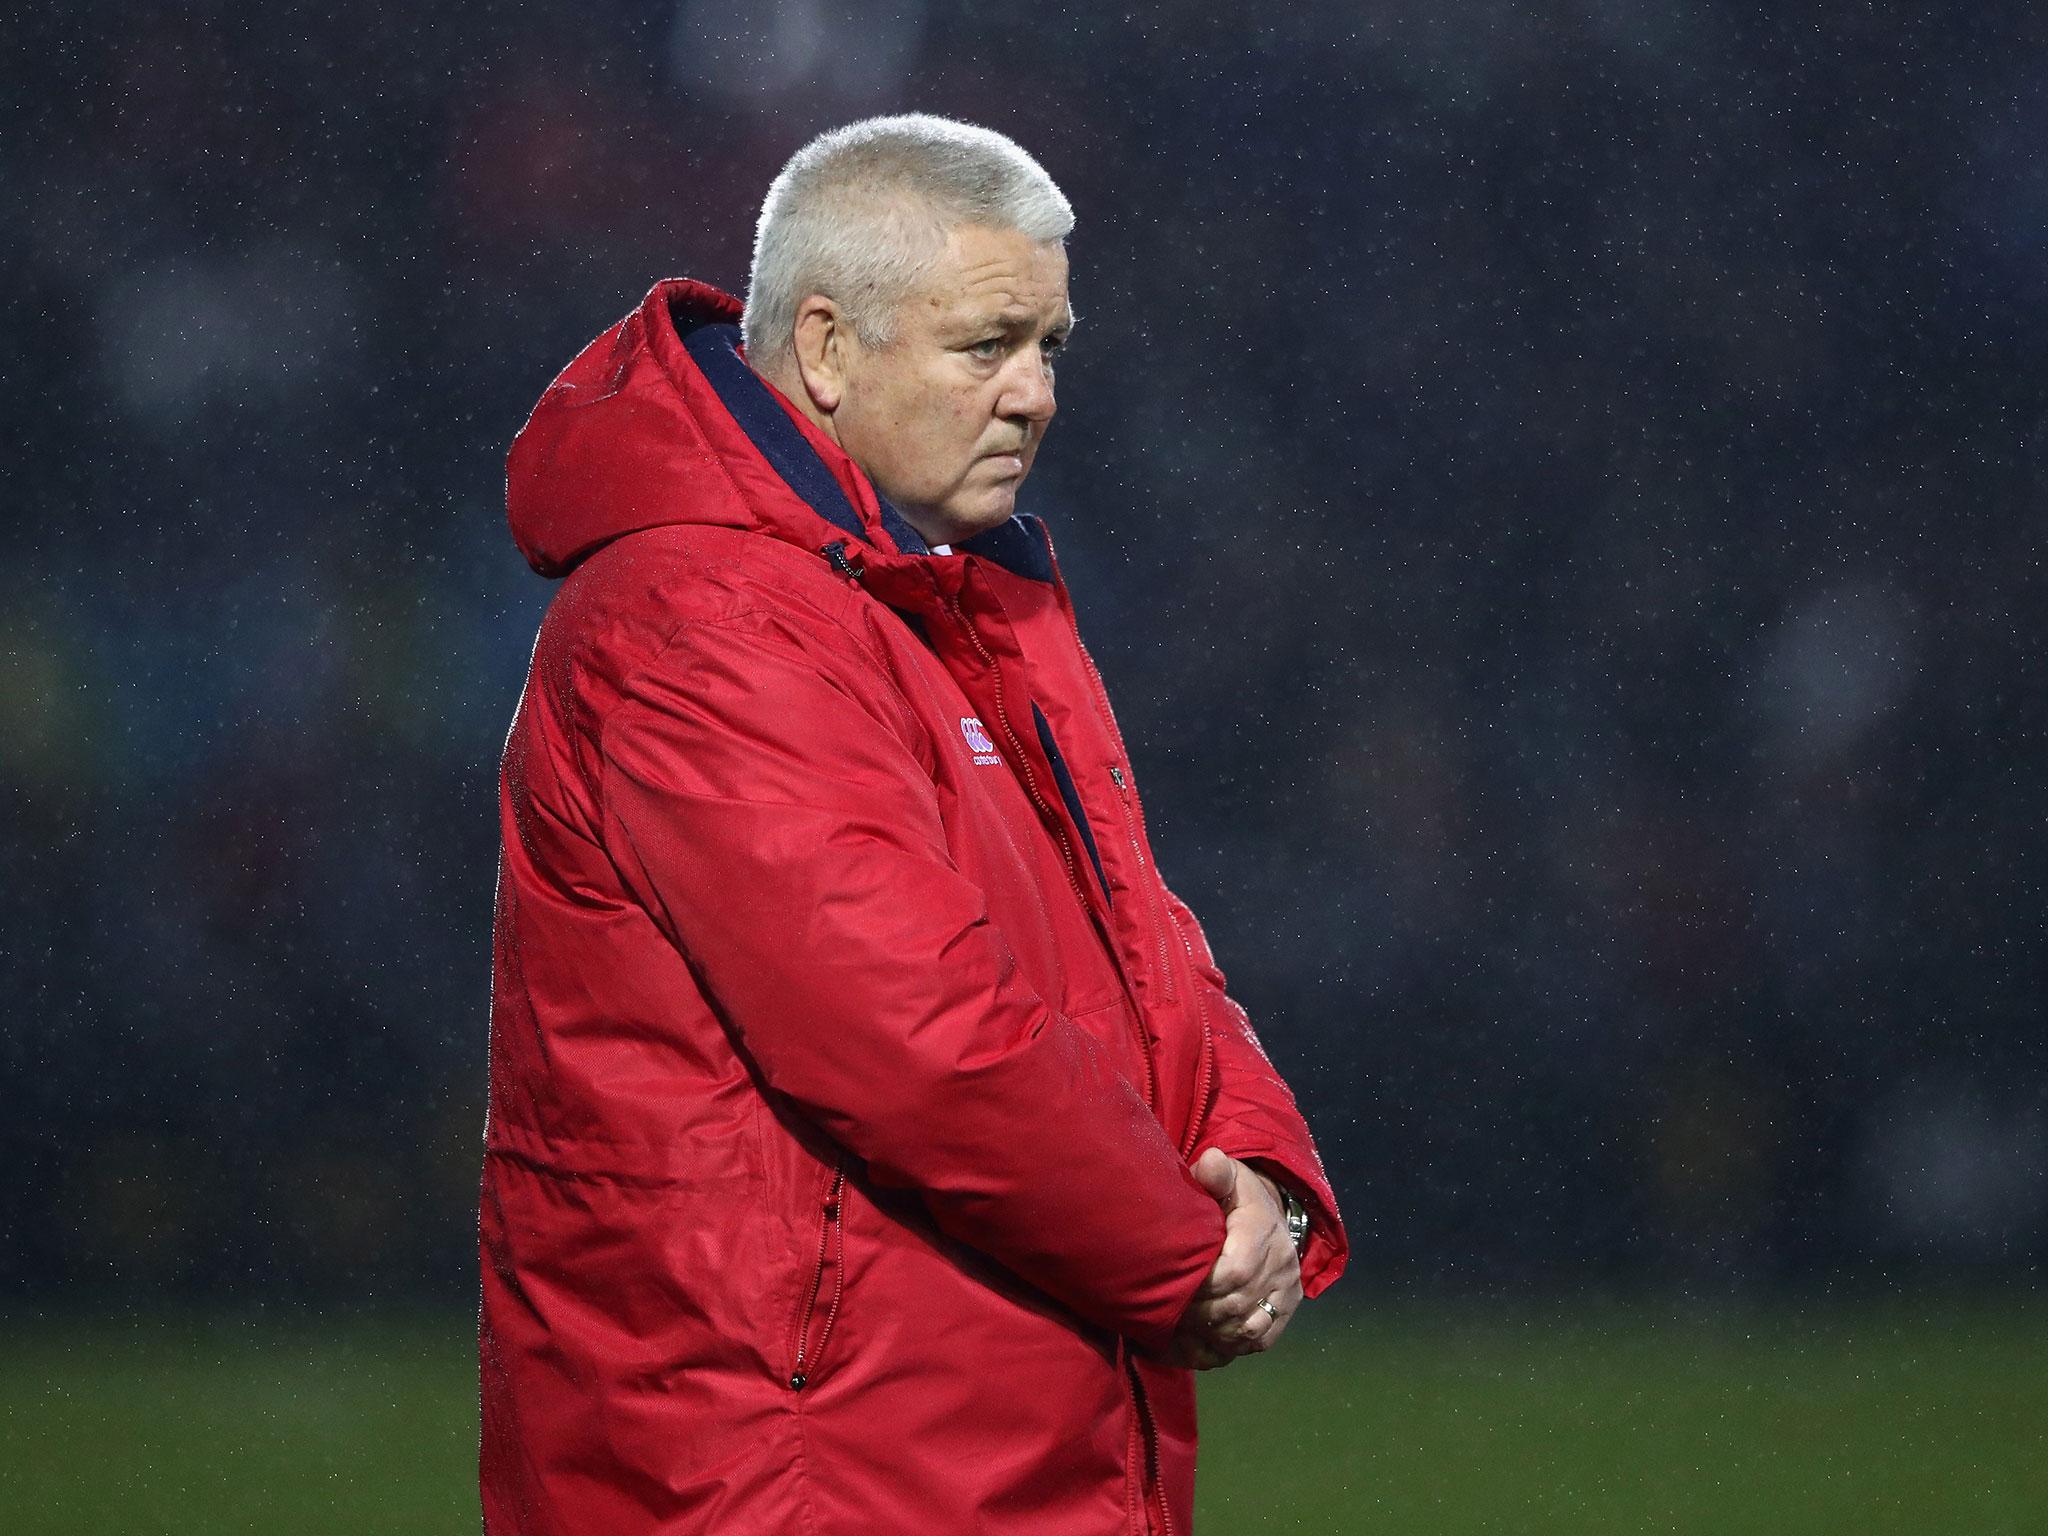 Warren Gatland has hit out against the tactic